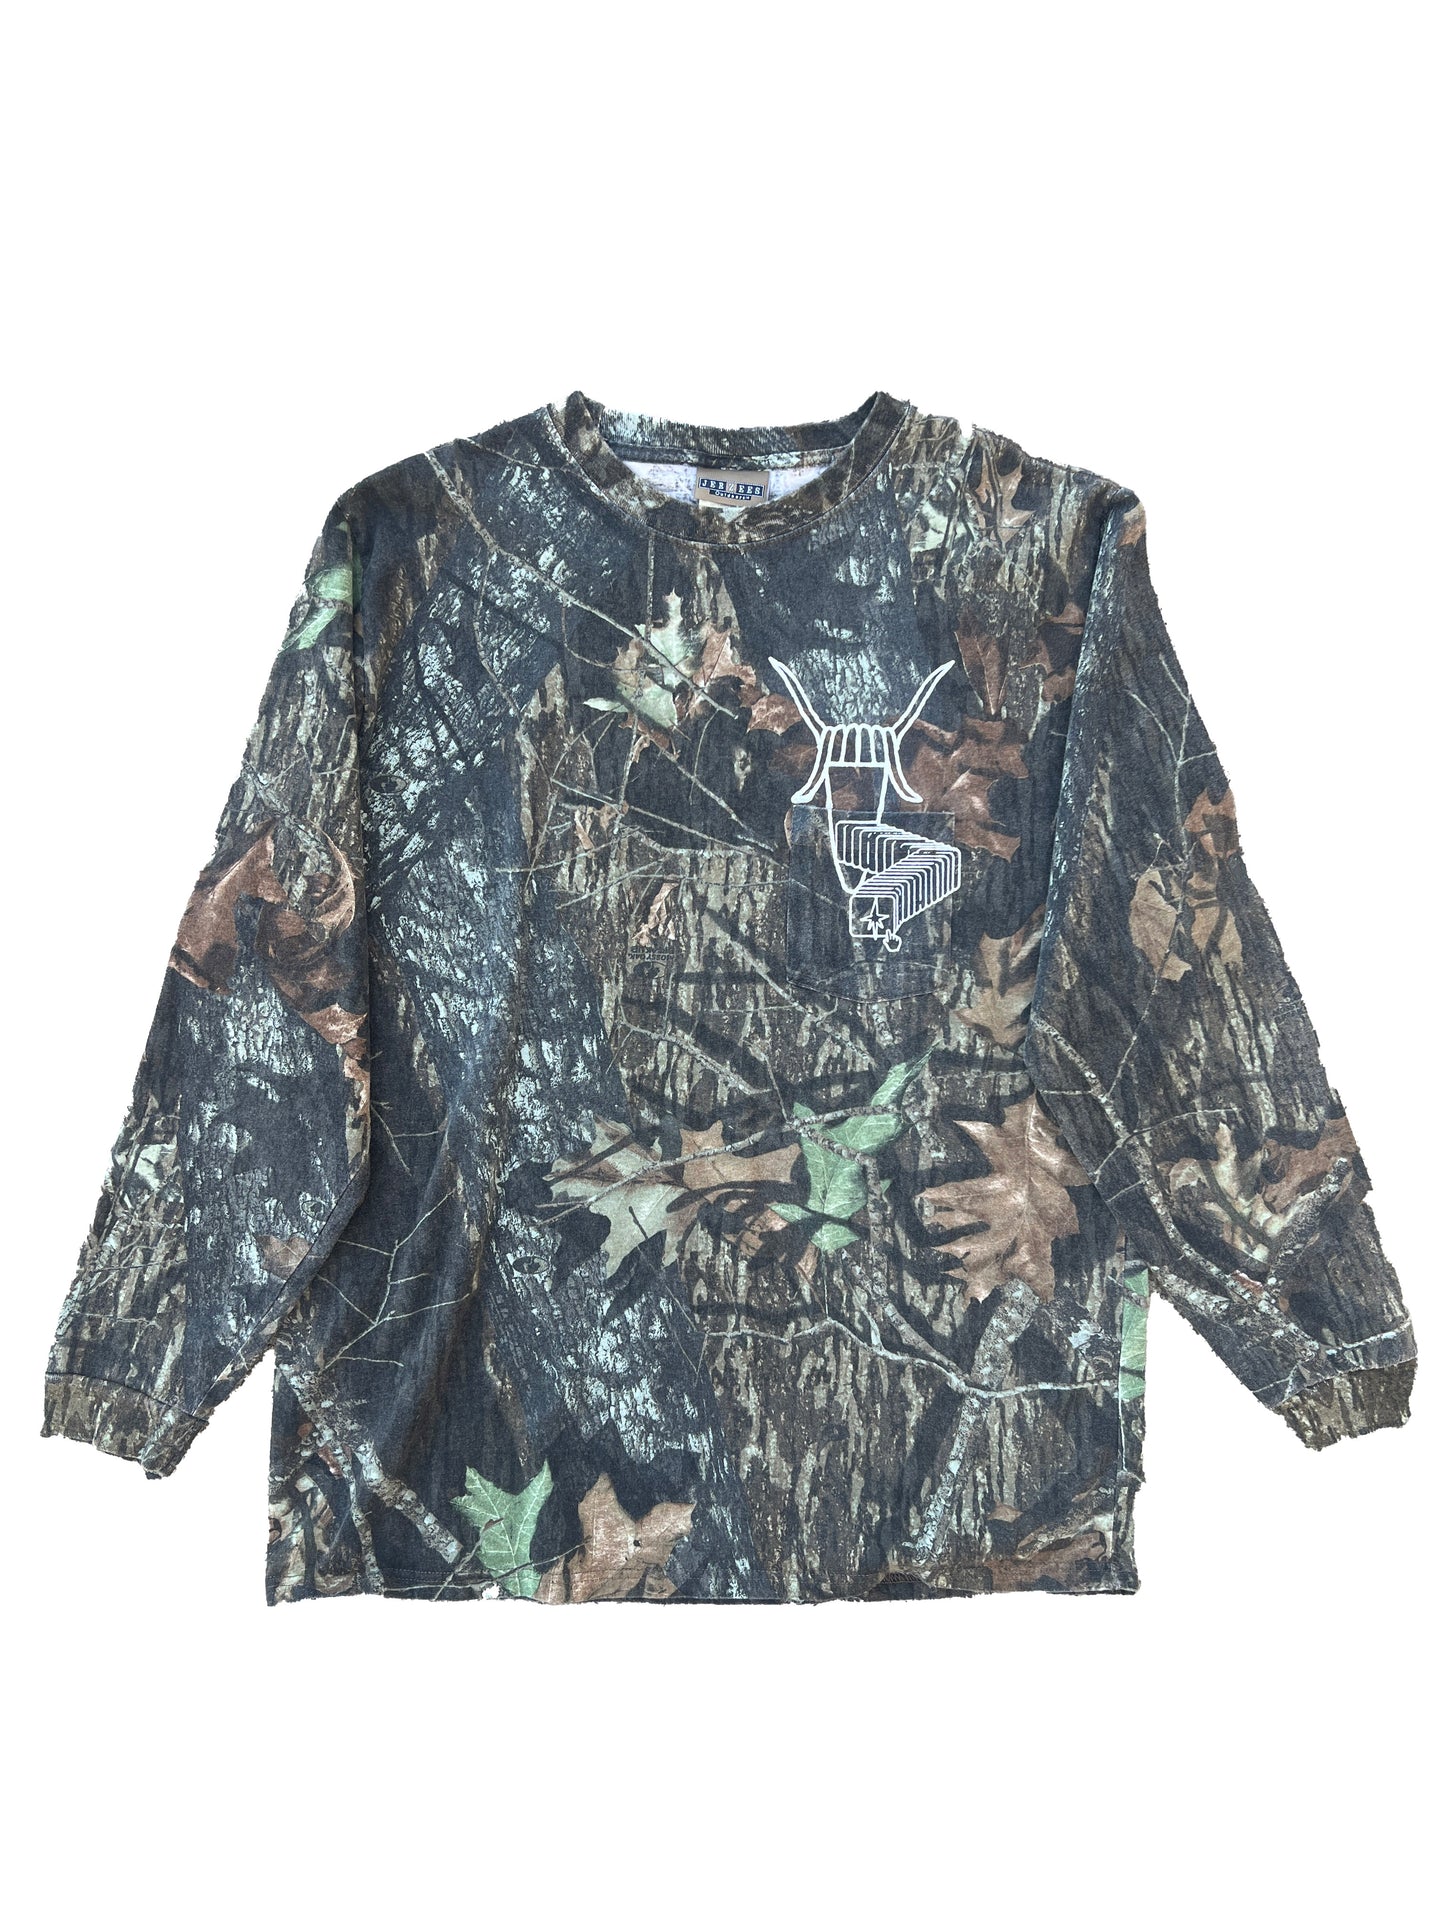 Light Selector on Vintage Long Sleeve Camouflage